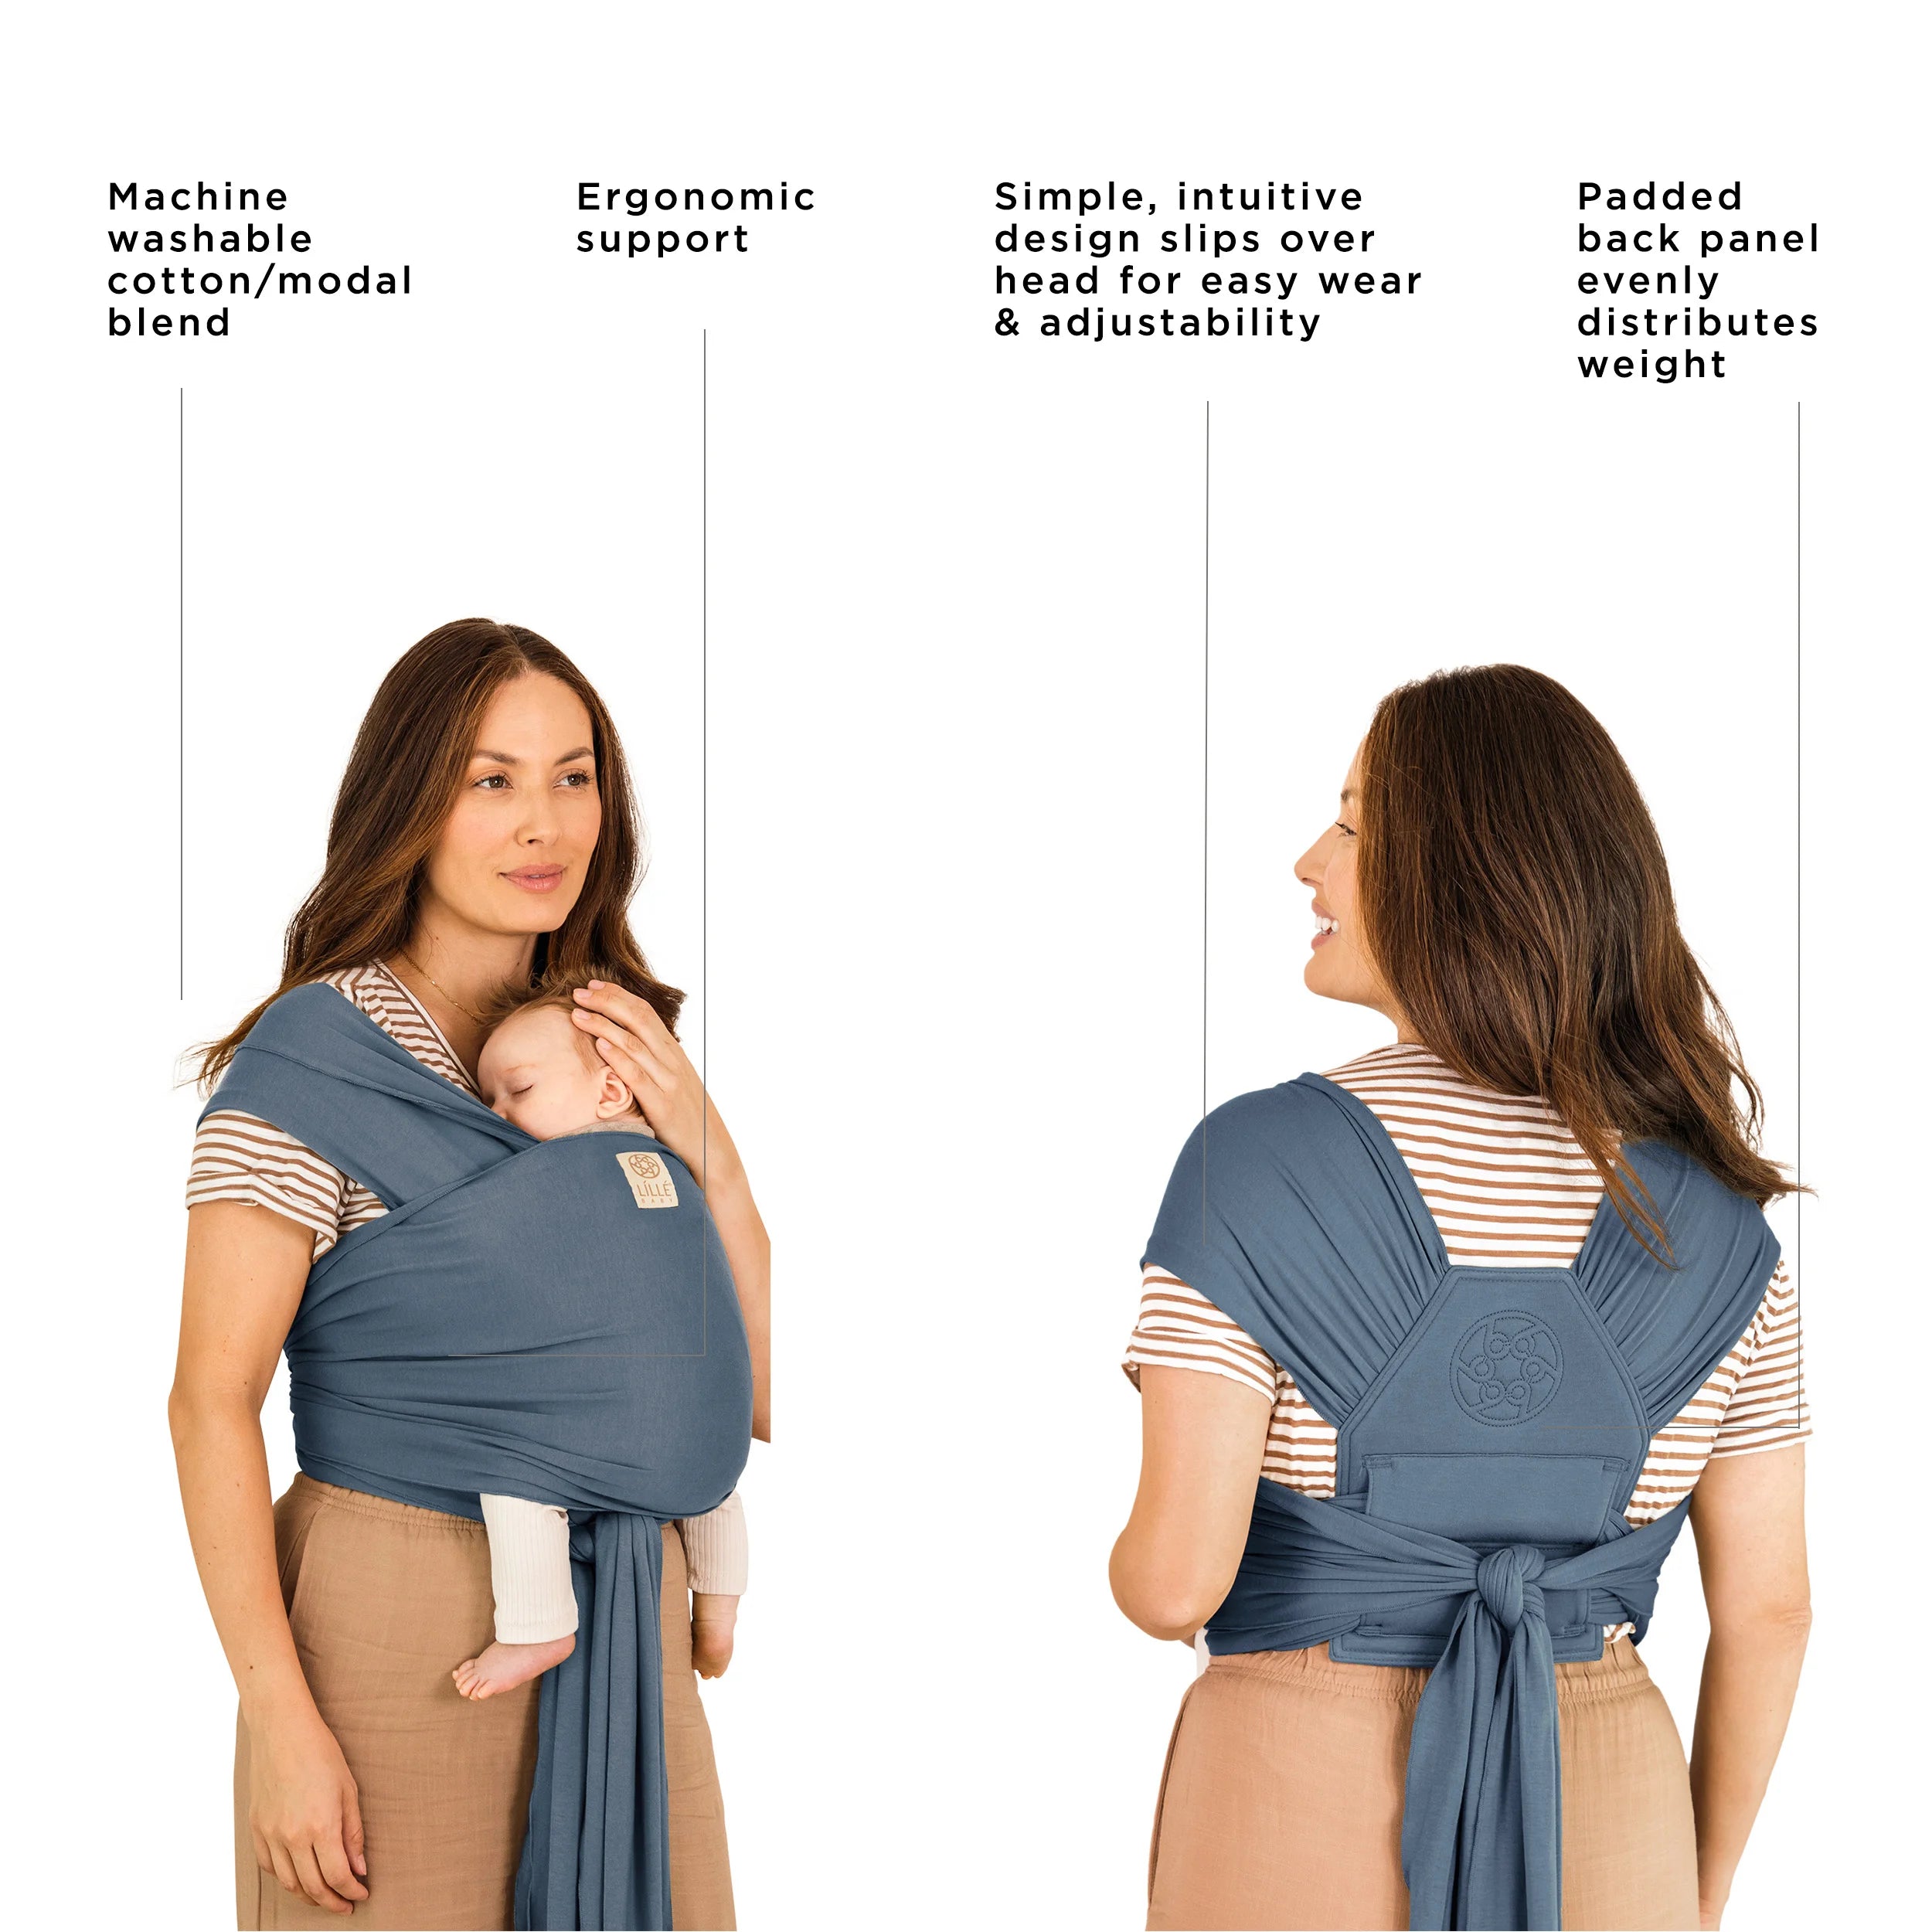 dragonfly wrap is machine washable cotton/modal blend, ergonomic support, simple intuitive design slips over head for easy wear and adjustability, padded back panel evenly distributes weight